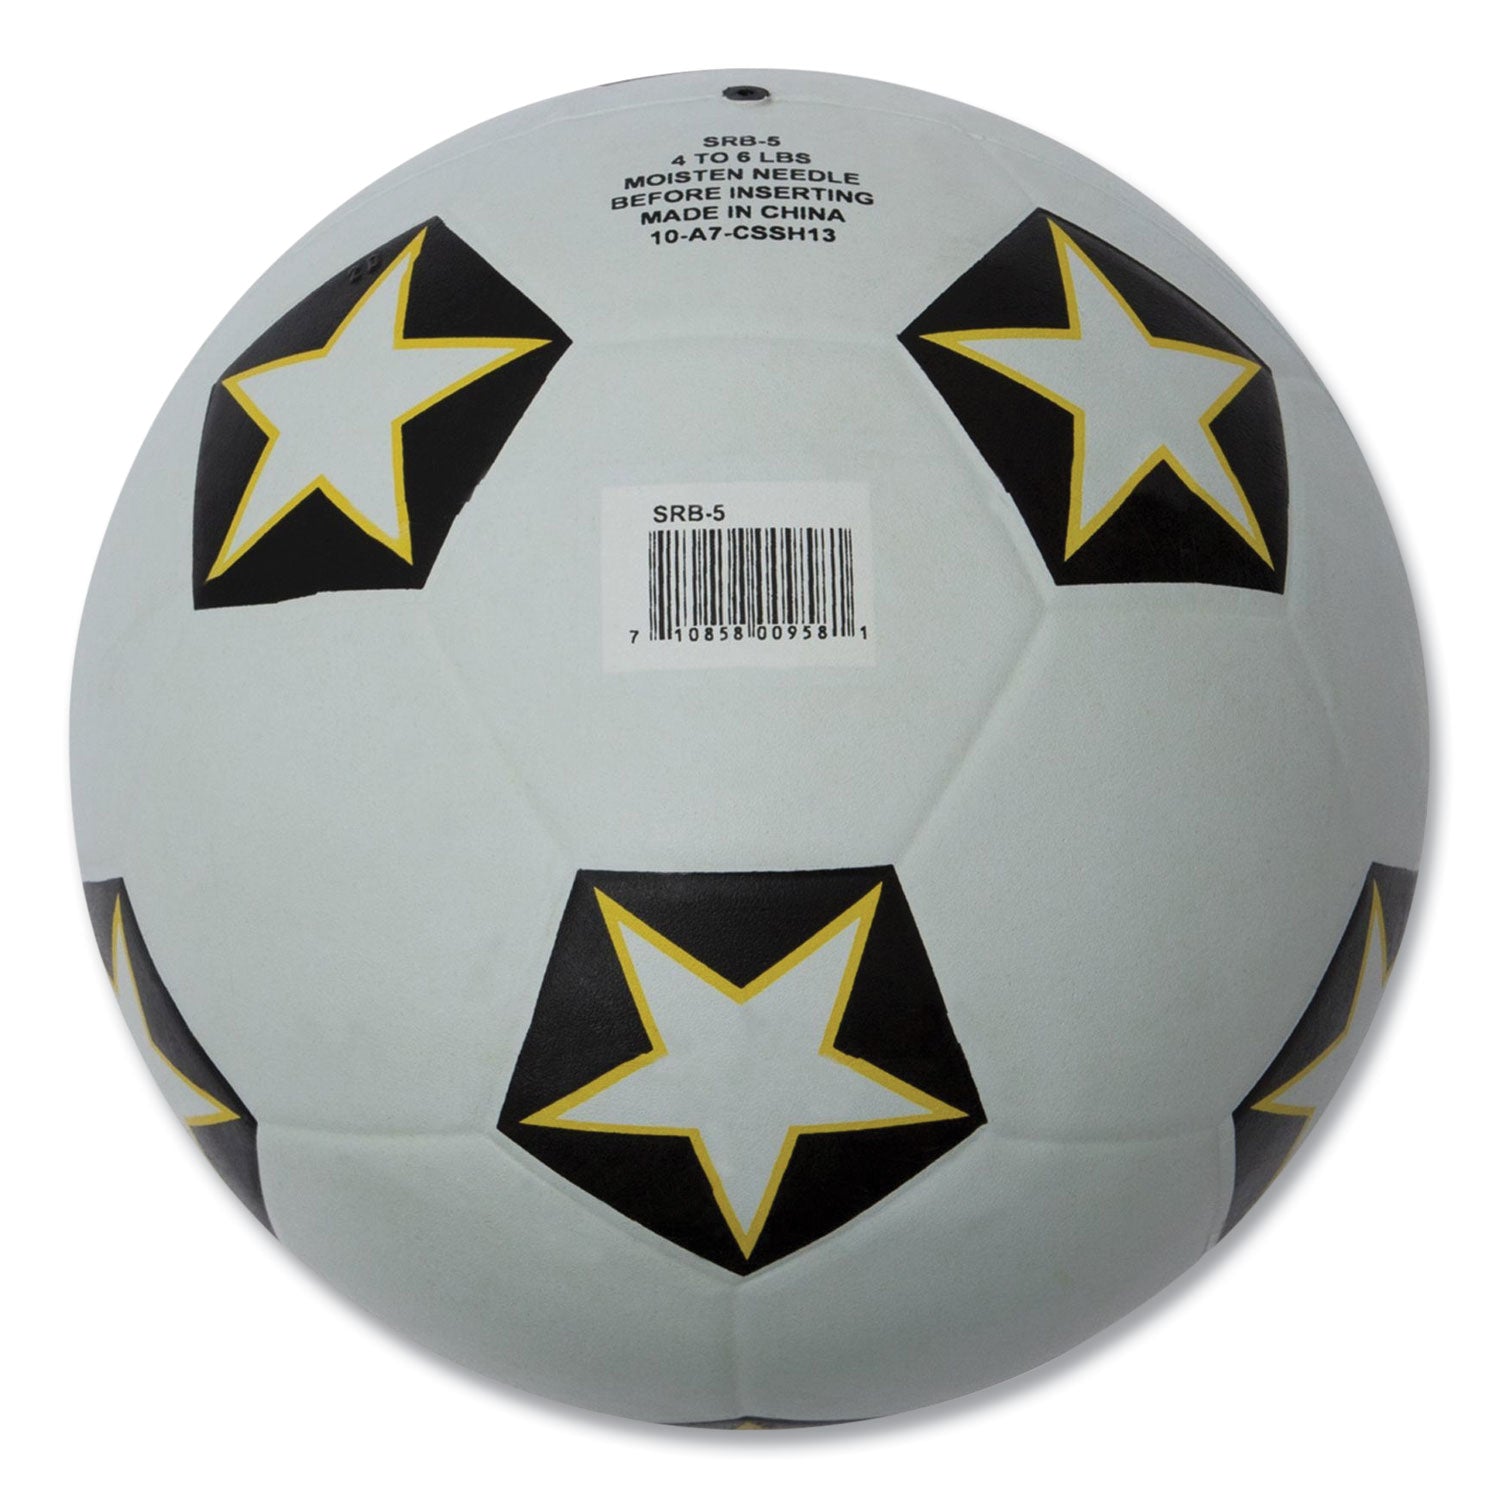 Rubber Sports Ball, For Soccer, No. 5 Size, White/Black - 